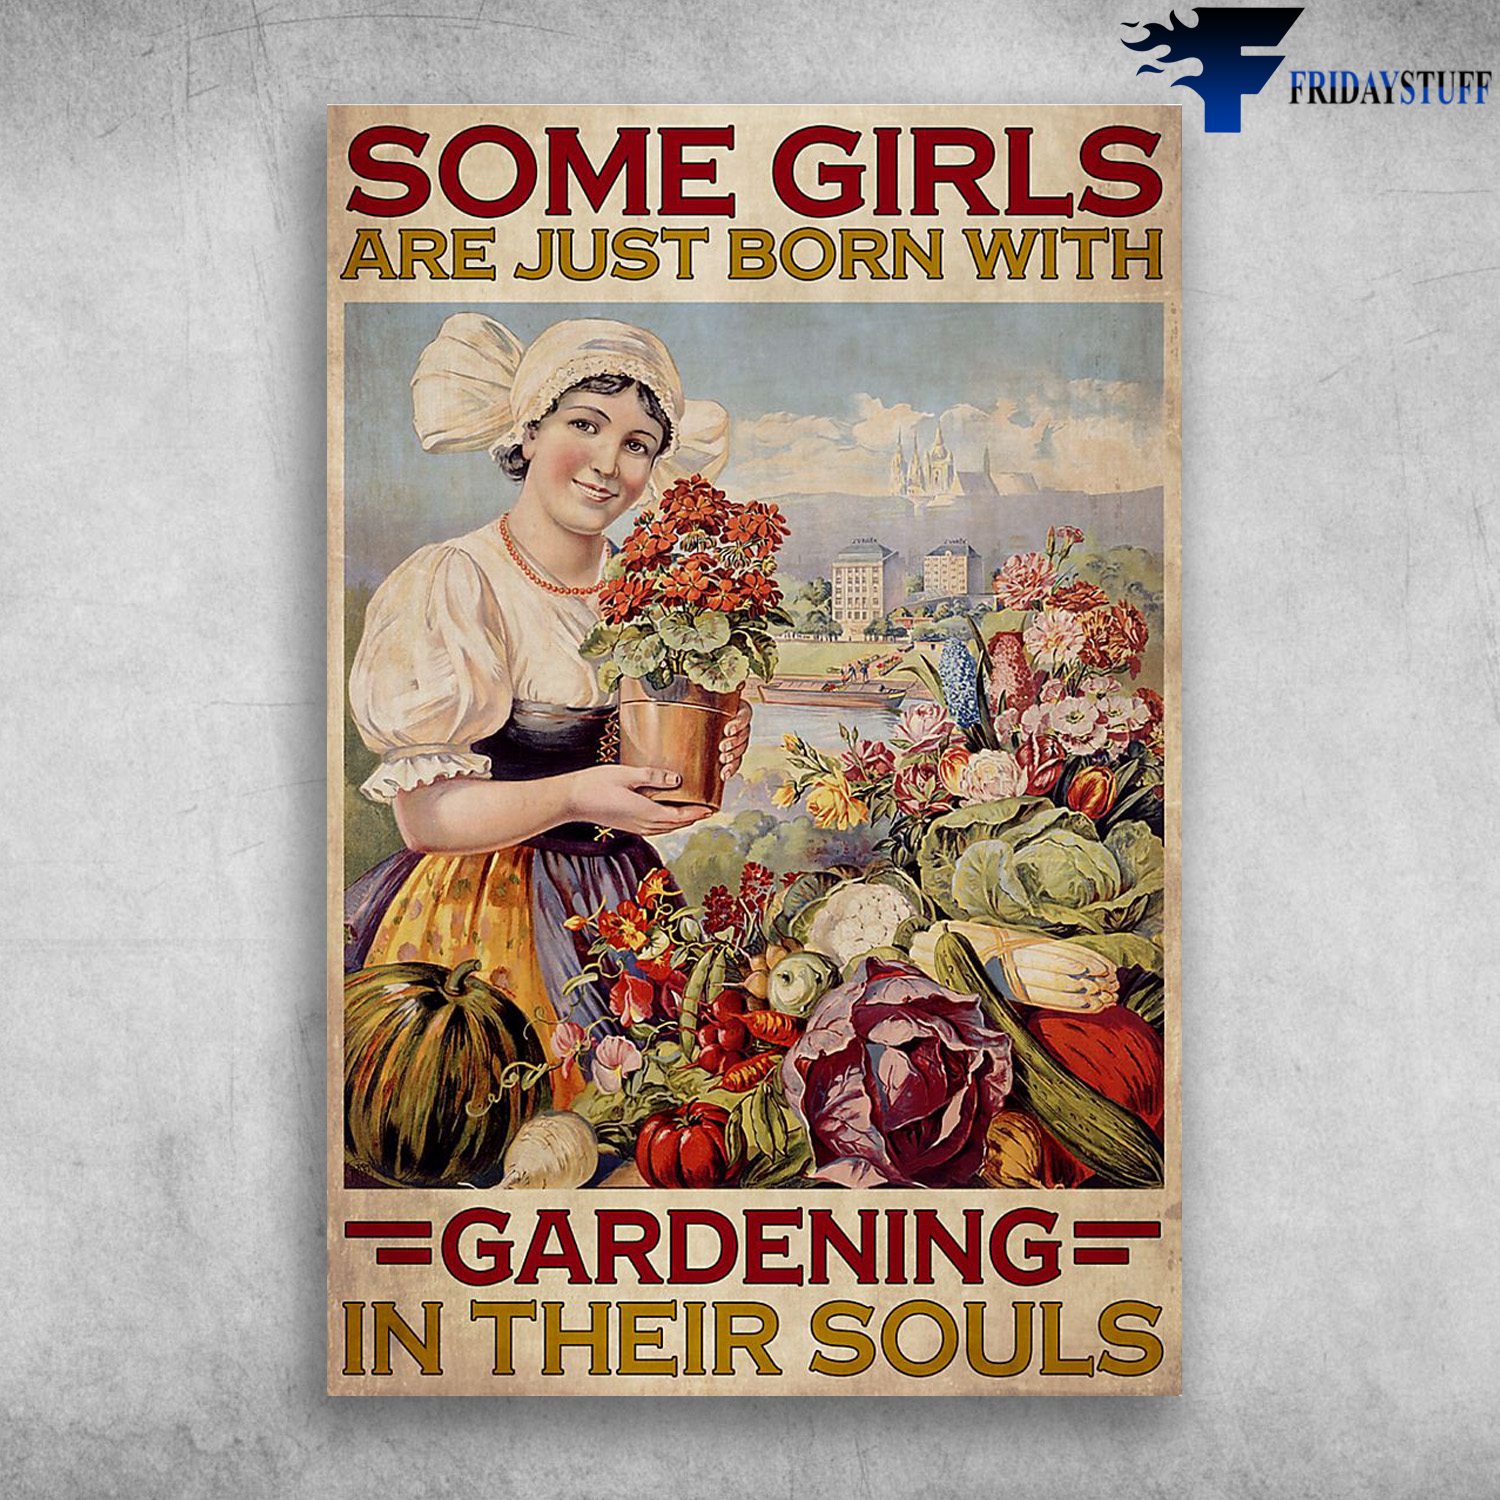 Girl Love To Garden - Some Girls Are Just Born With Gardening In Their Souls